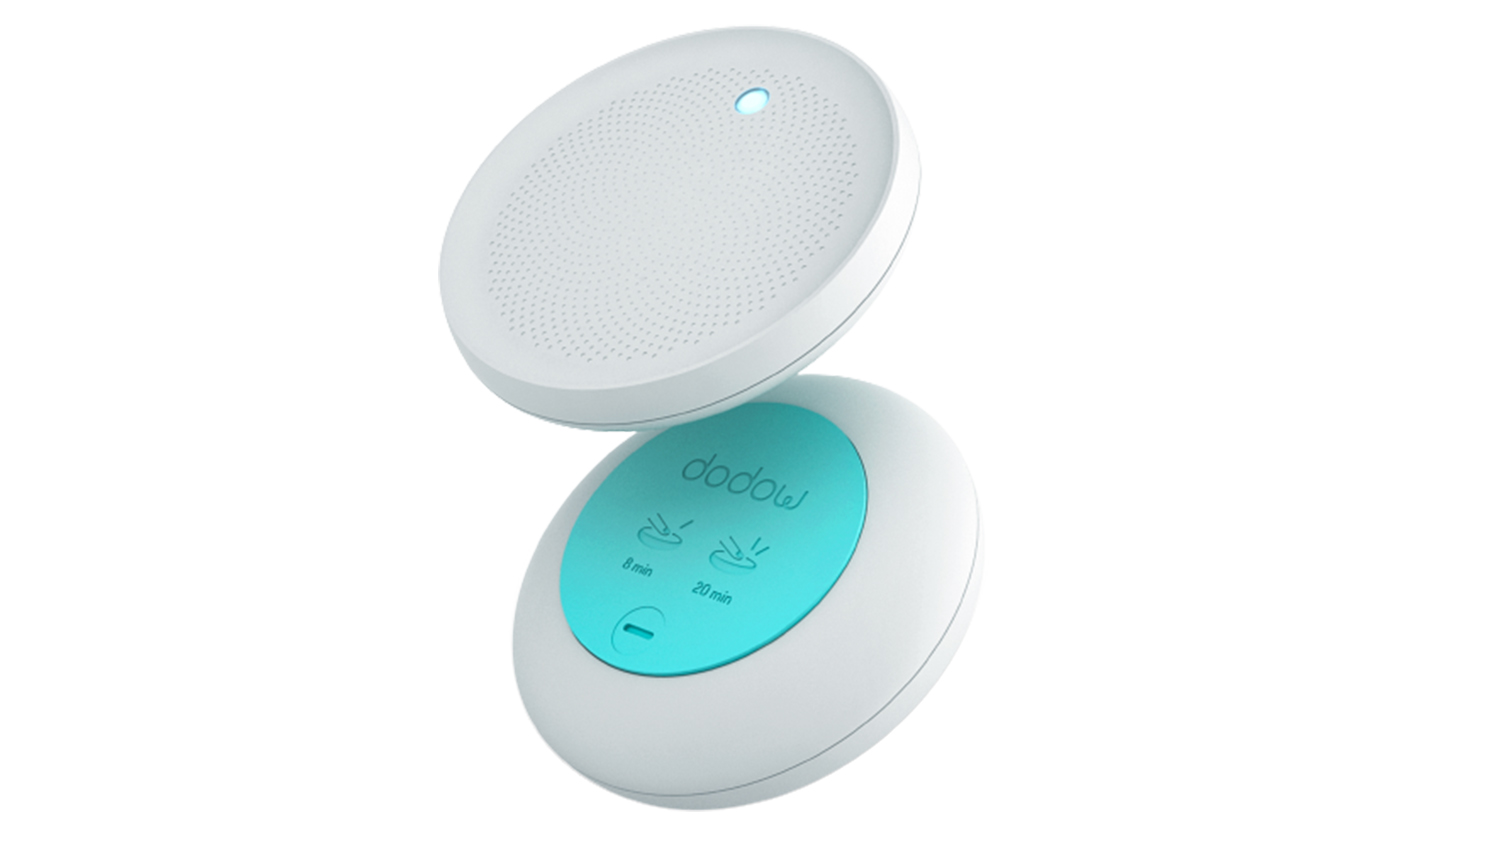 The Dodow sleep device shown from the front and back